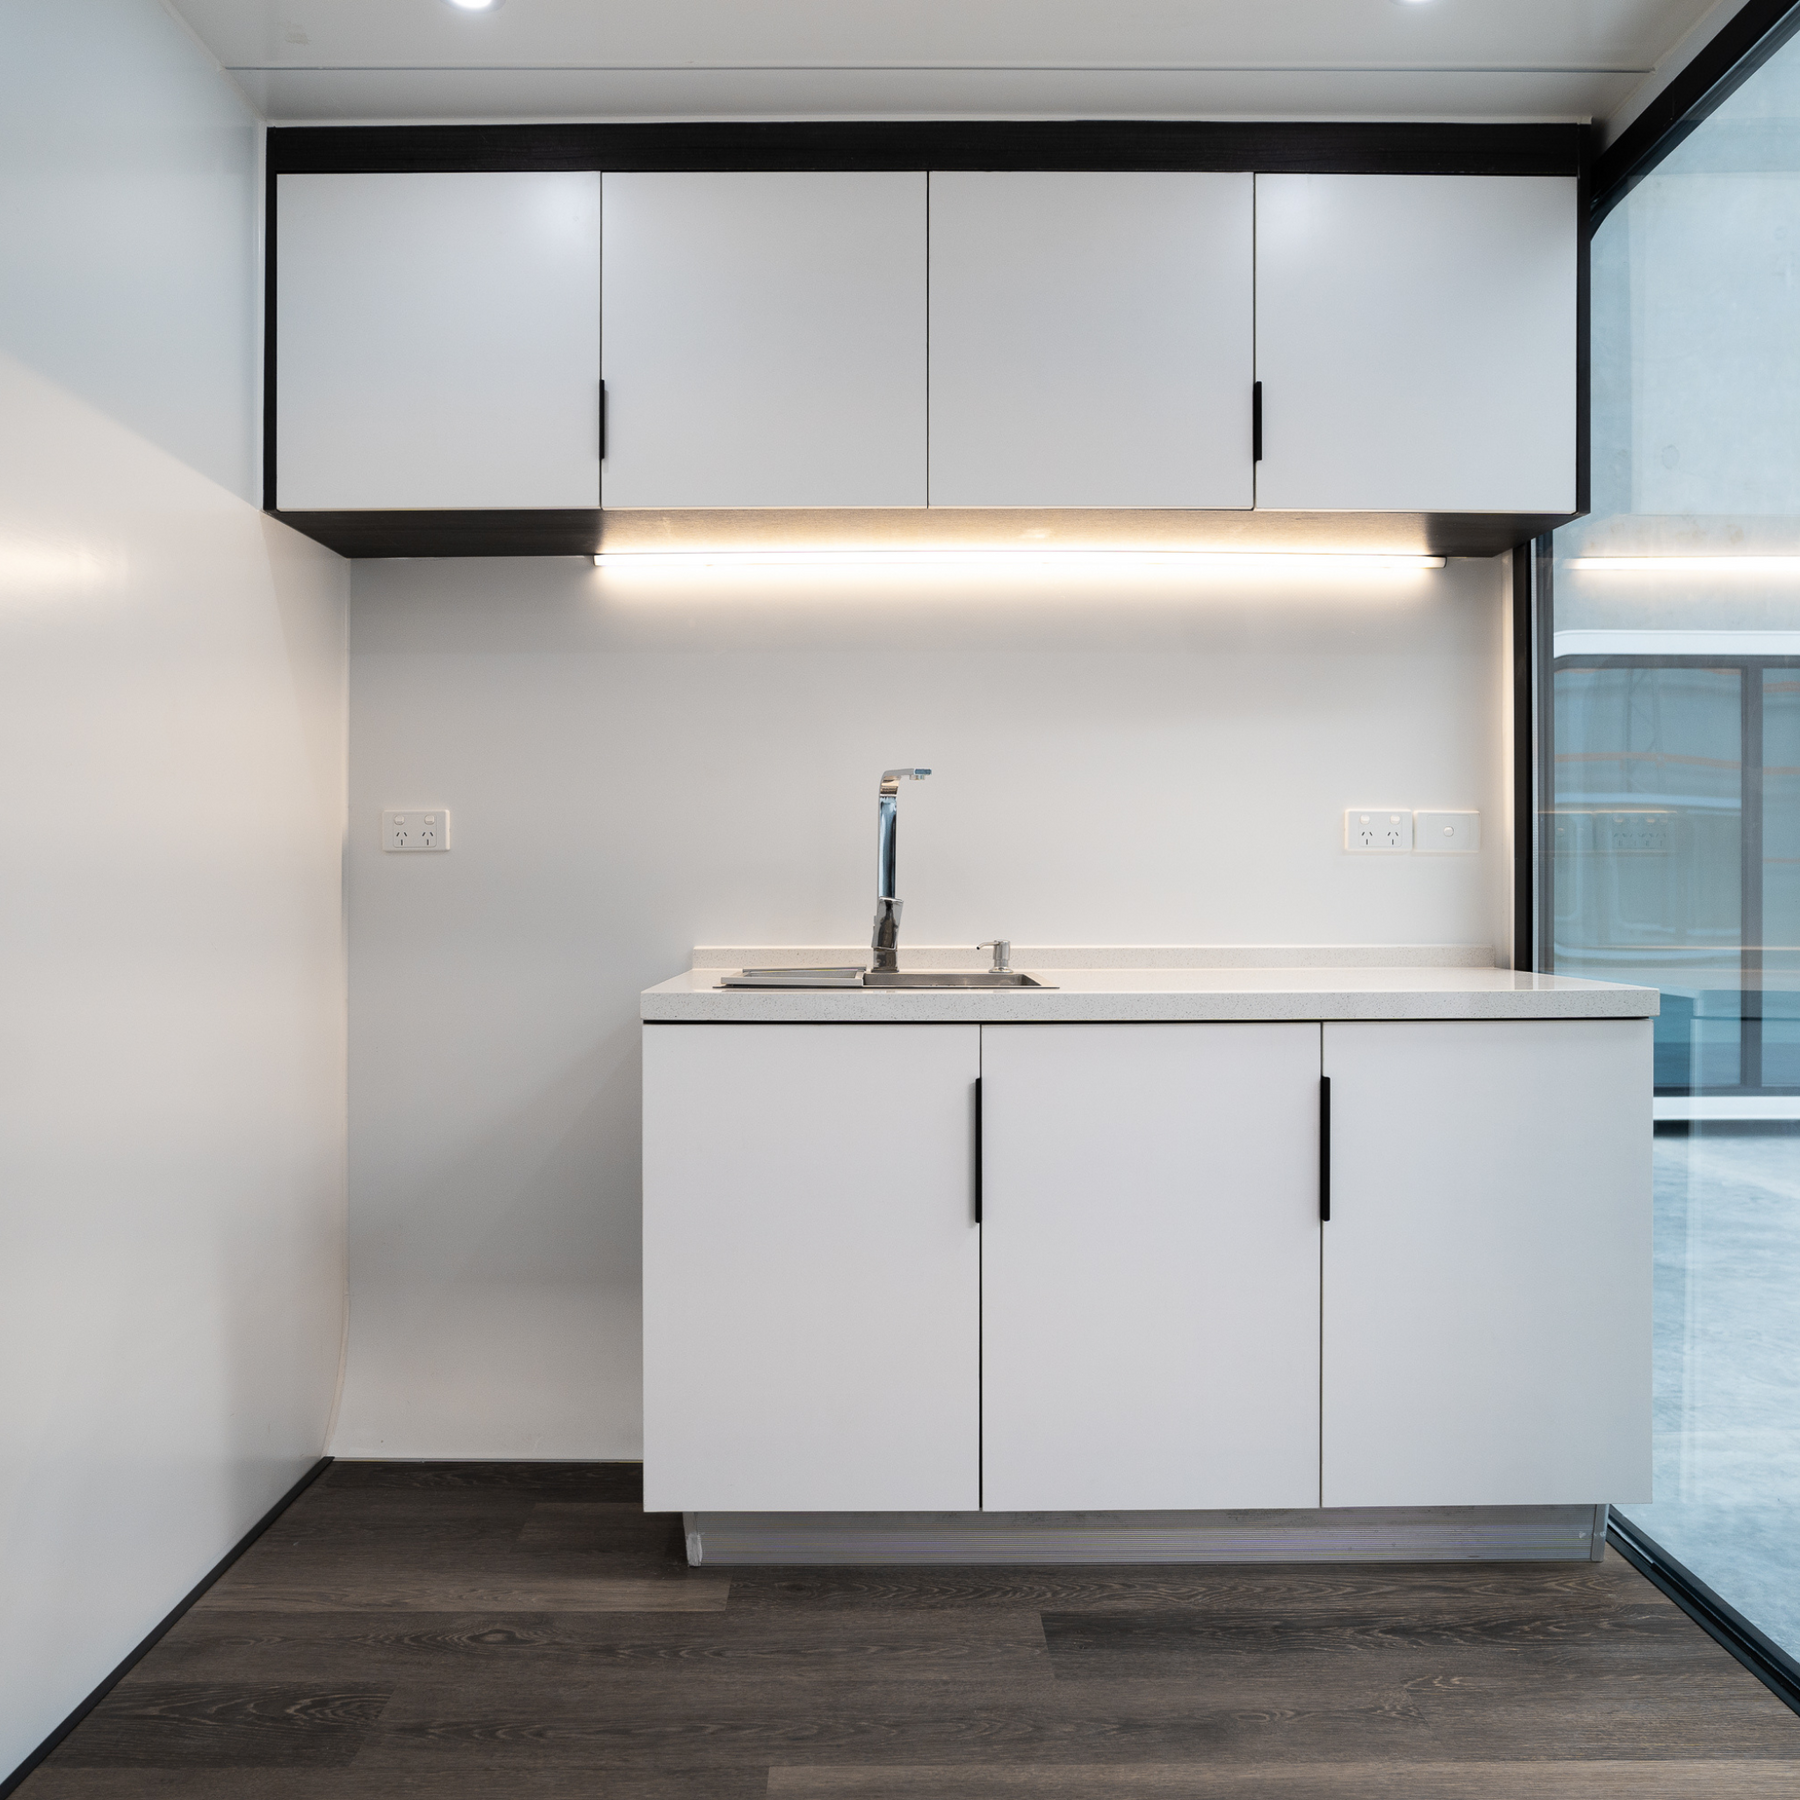 built-in kitchenette in spacee pods with soft-close cabinetry, sink and LED strip lighting